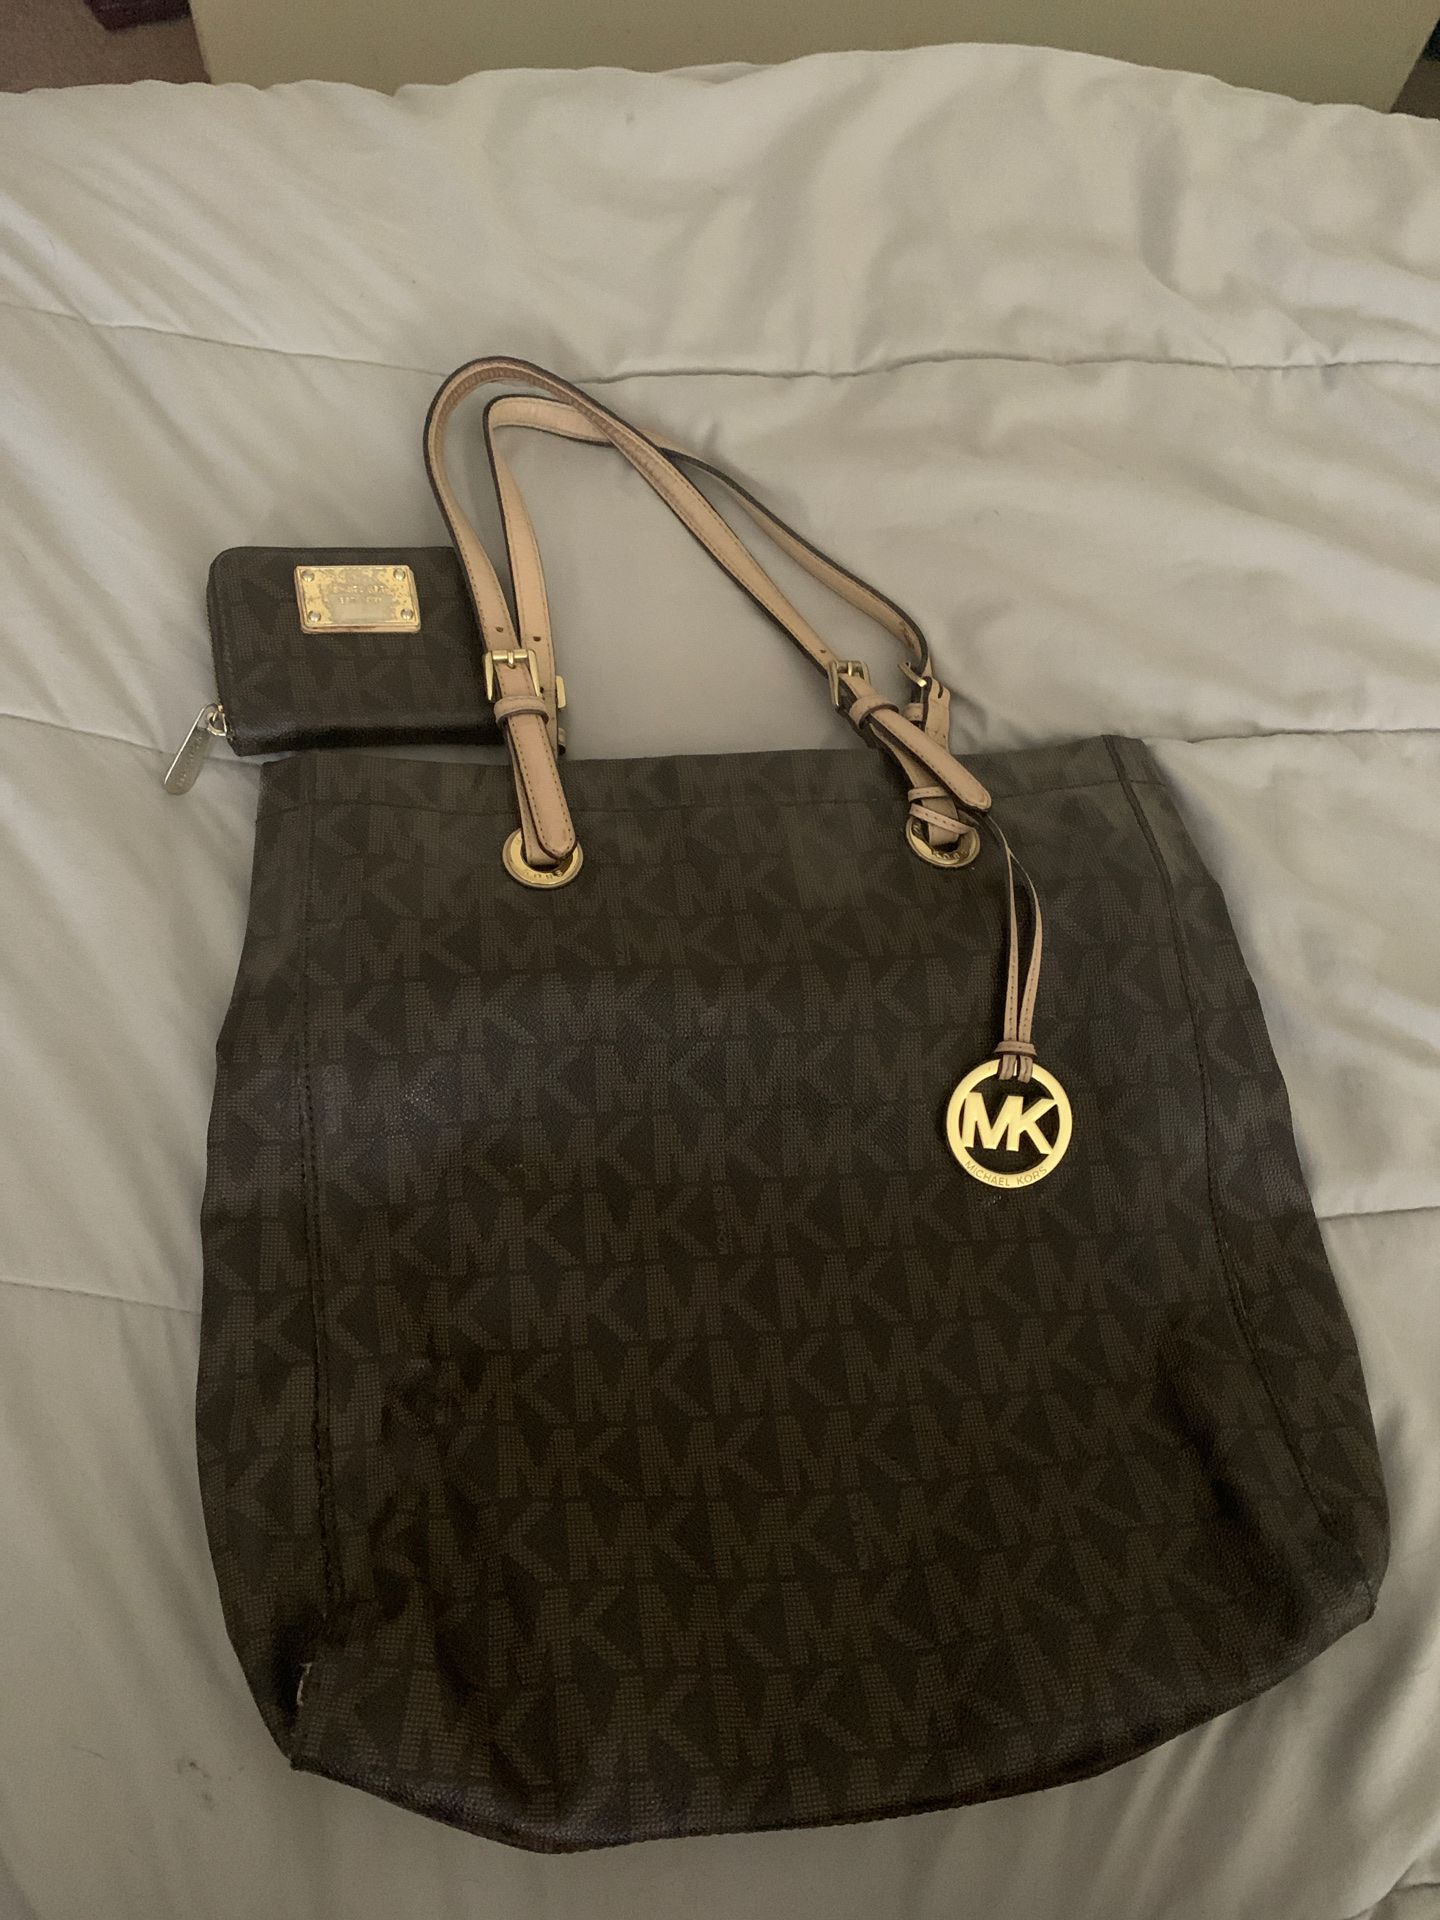 Michael Kors purse and wallet.